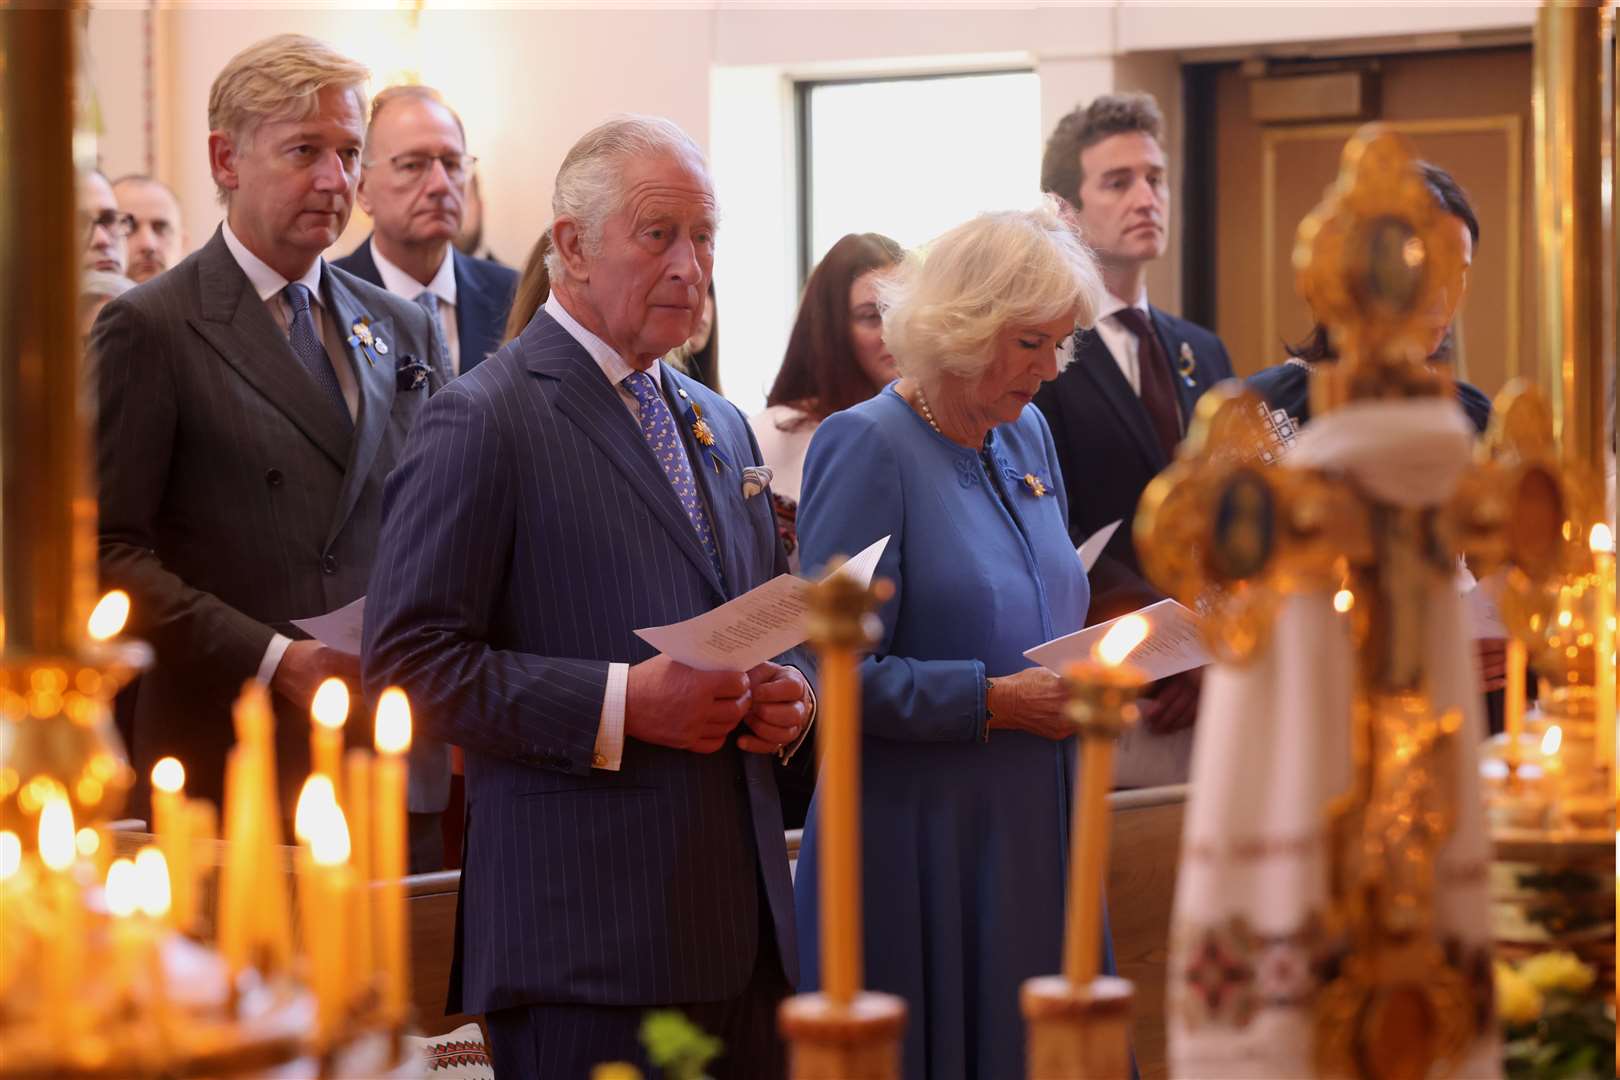 The Prince of Wales and Duchess of Cornwall during a service at the Ukrainian Community at the Blessed Virgin Ukrainian Orthodox Cathedral in Ottawa. Ian Vogler/Daily Mirror